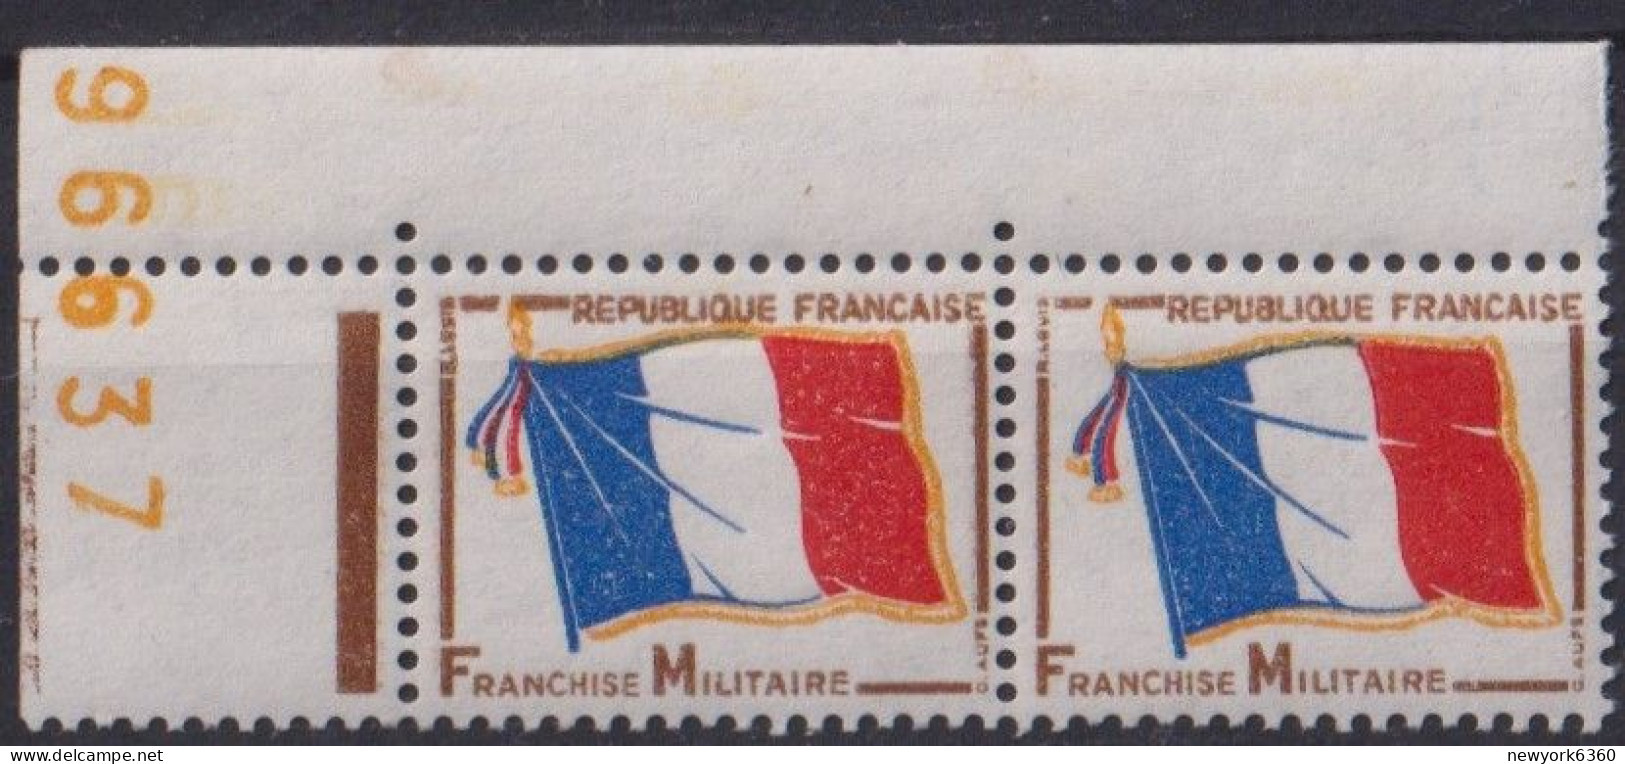 1964 FRANCE FRANCHISE MILITAIRE N** 13 MNH Paire - Timbres De Franchise Militaire